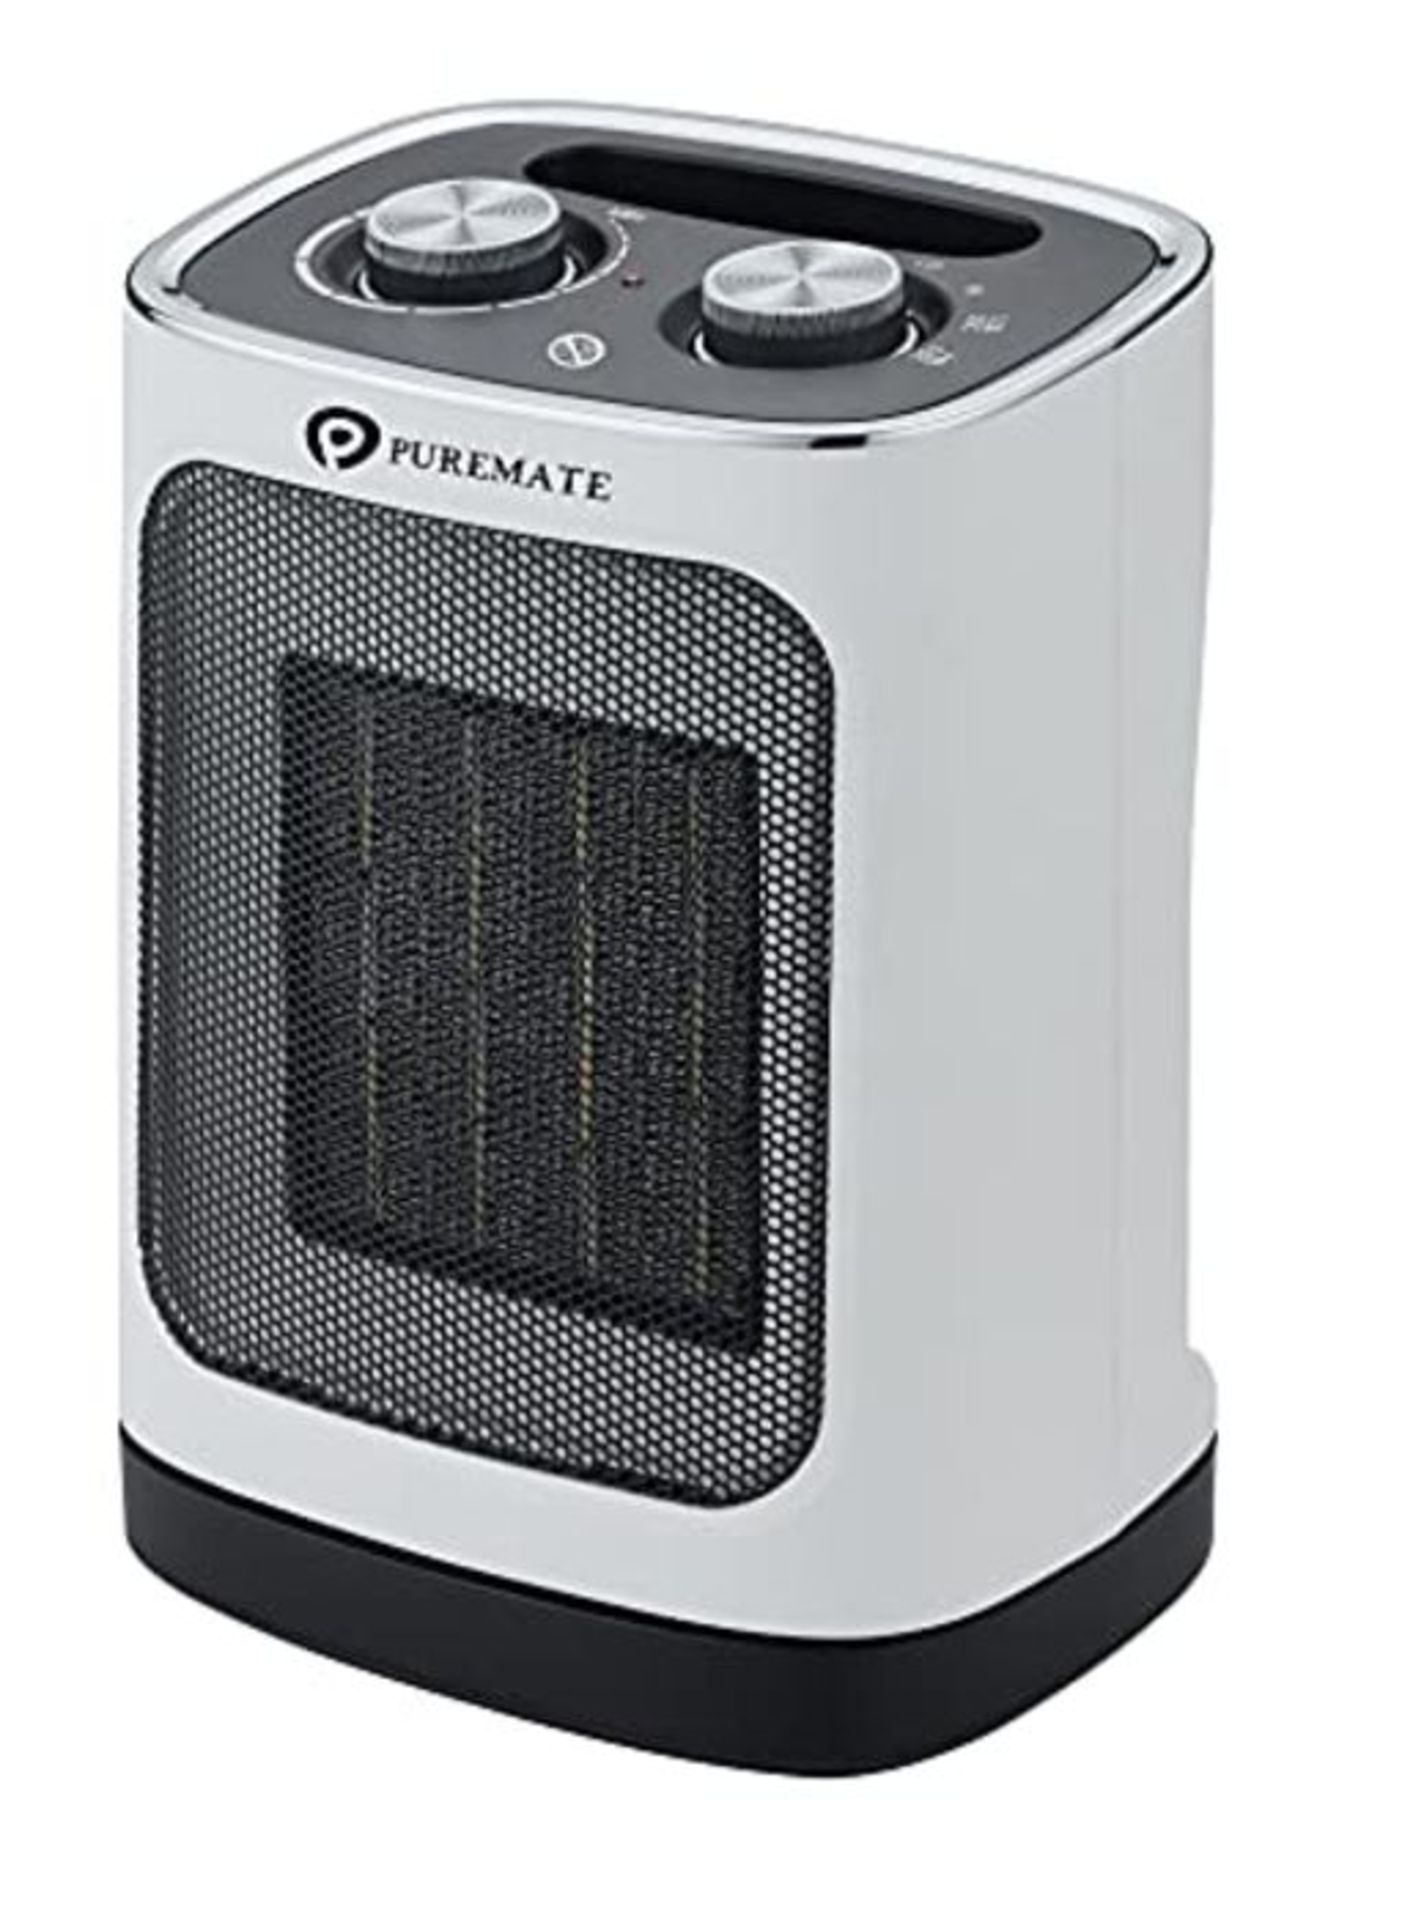 RRP £97.00 QHYTL PureMate Ceramic Fan Heater, 1800W Portable Electric Heater with 2 Heat Settings - Image 4 of 6